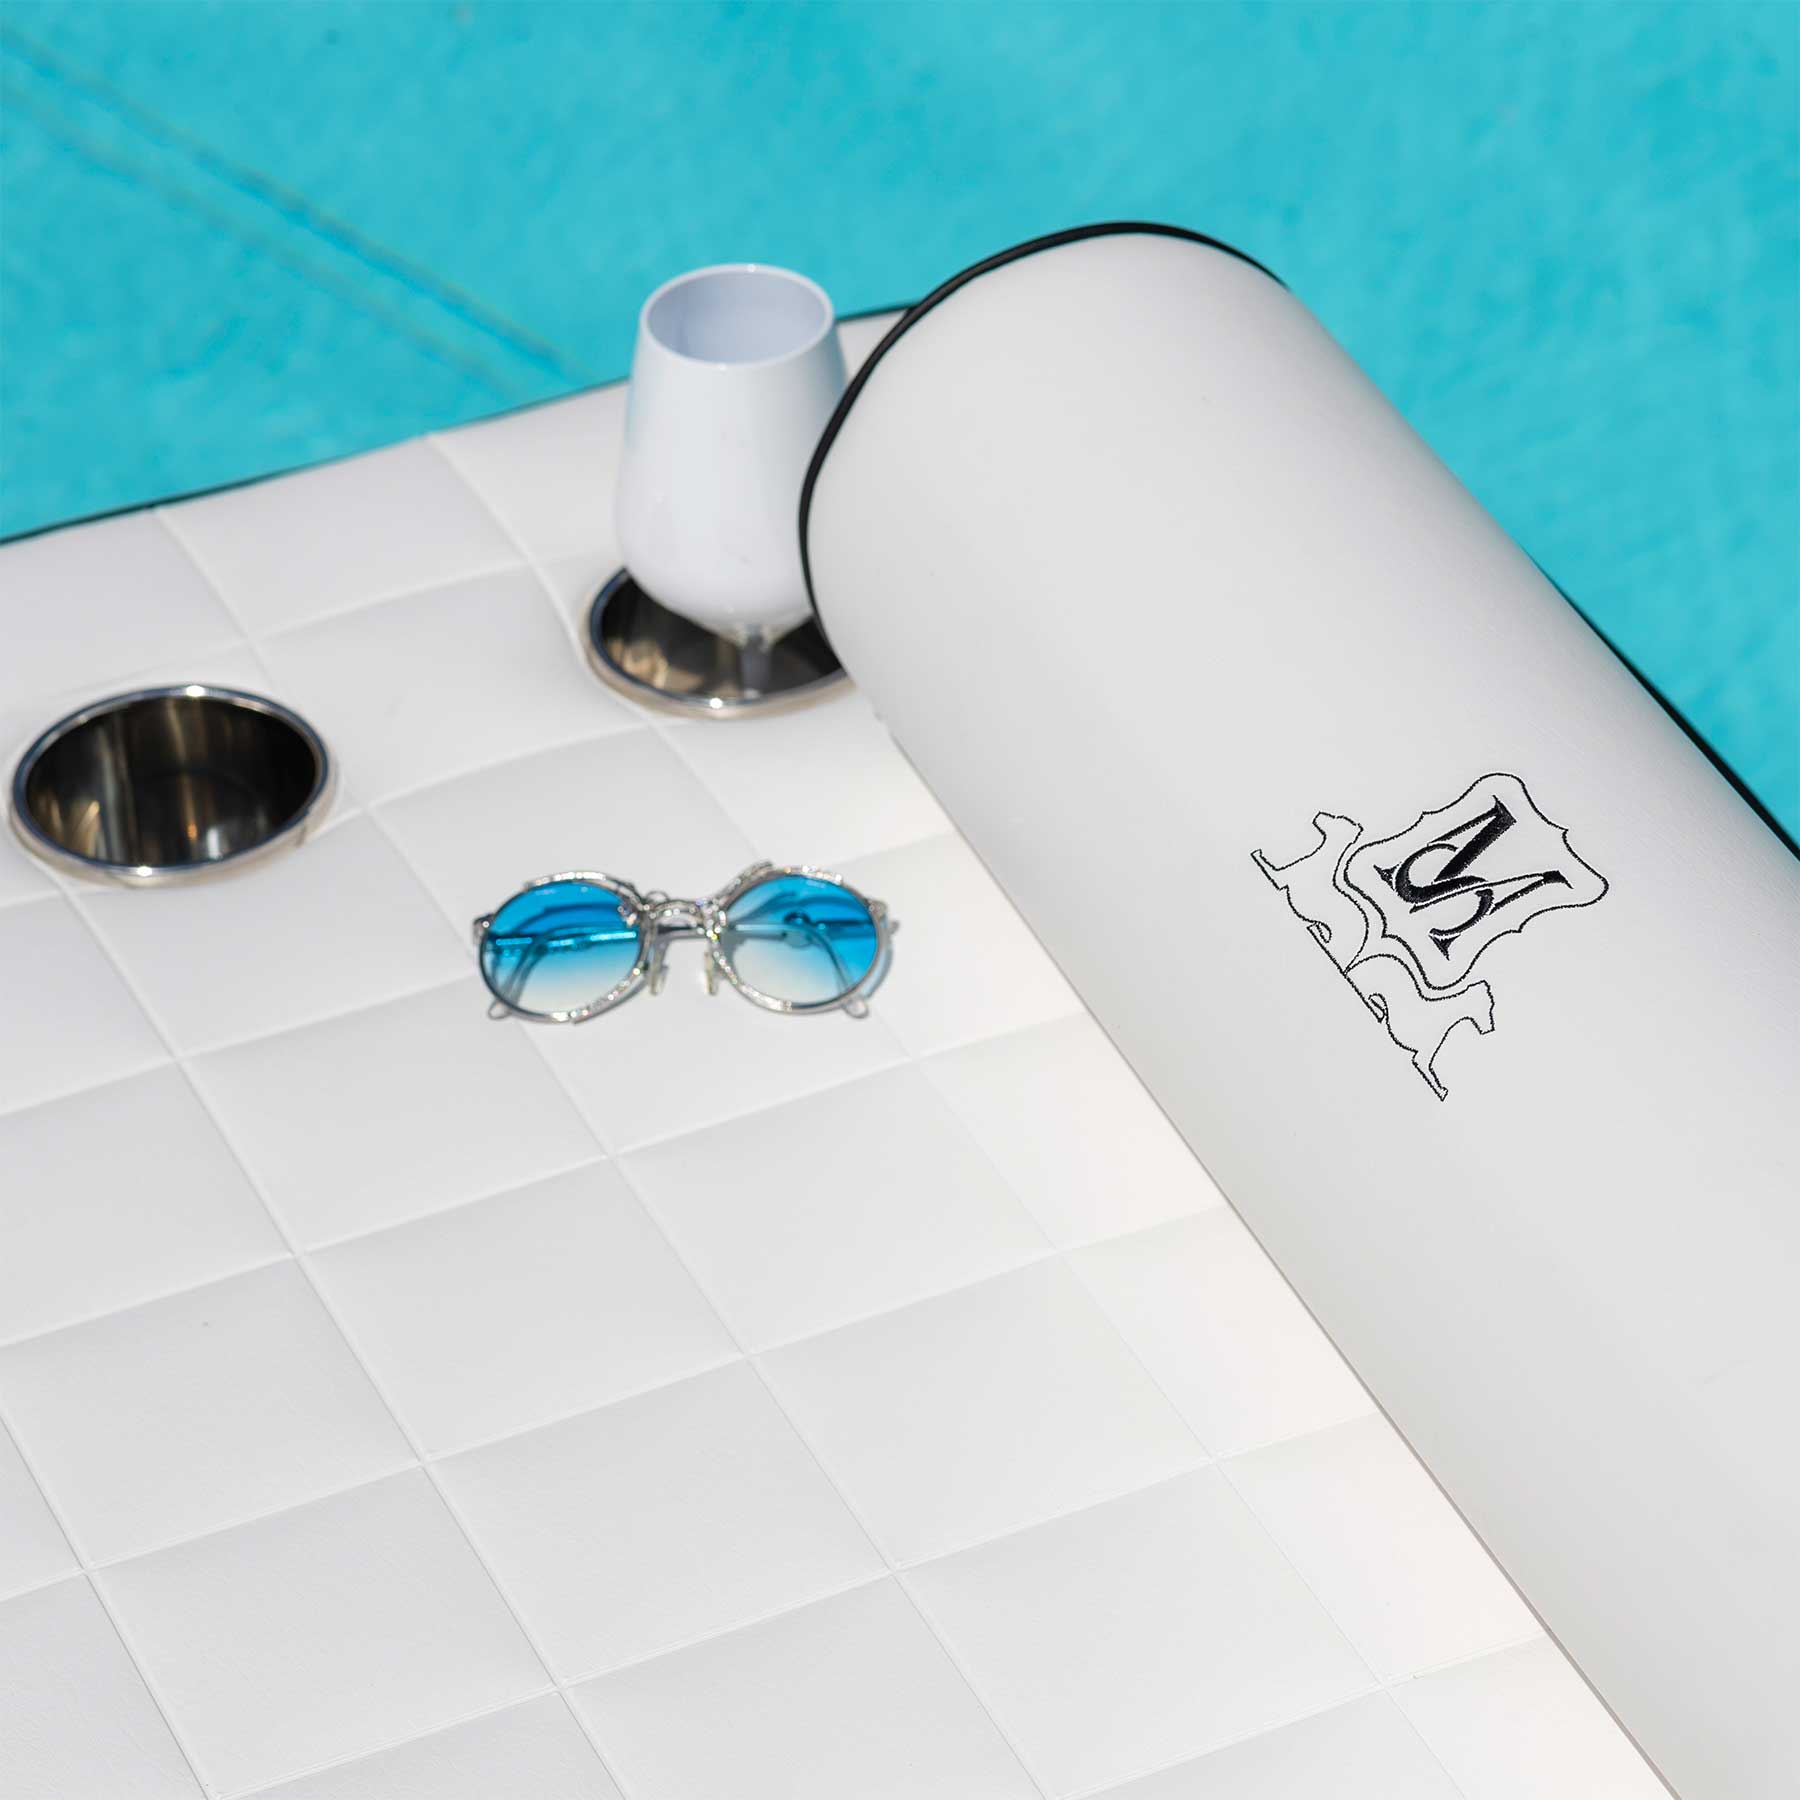 Floating sunbed in nautical eco-leather. Make the most of your pool with style and practicality. Available for online purchase with free home delivery.